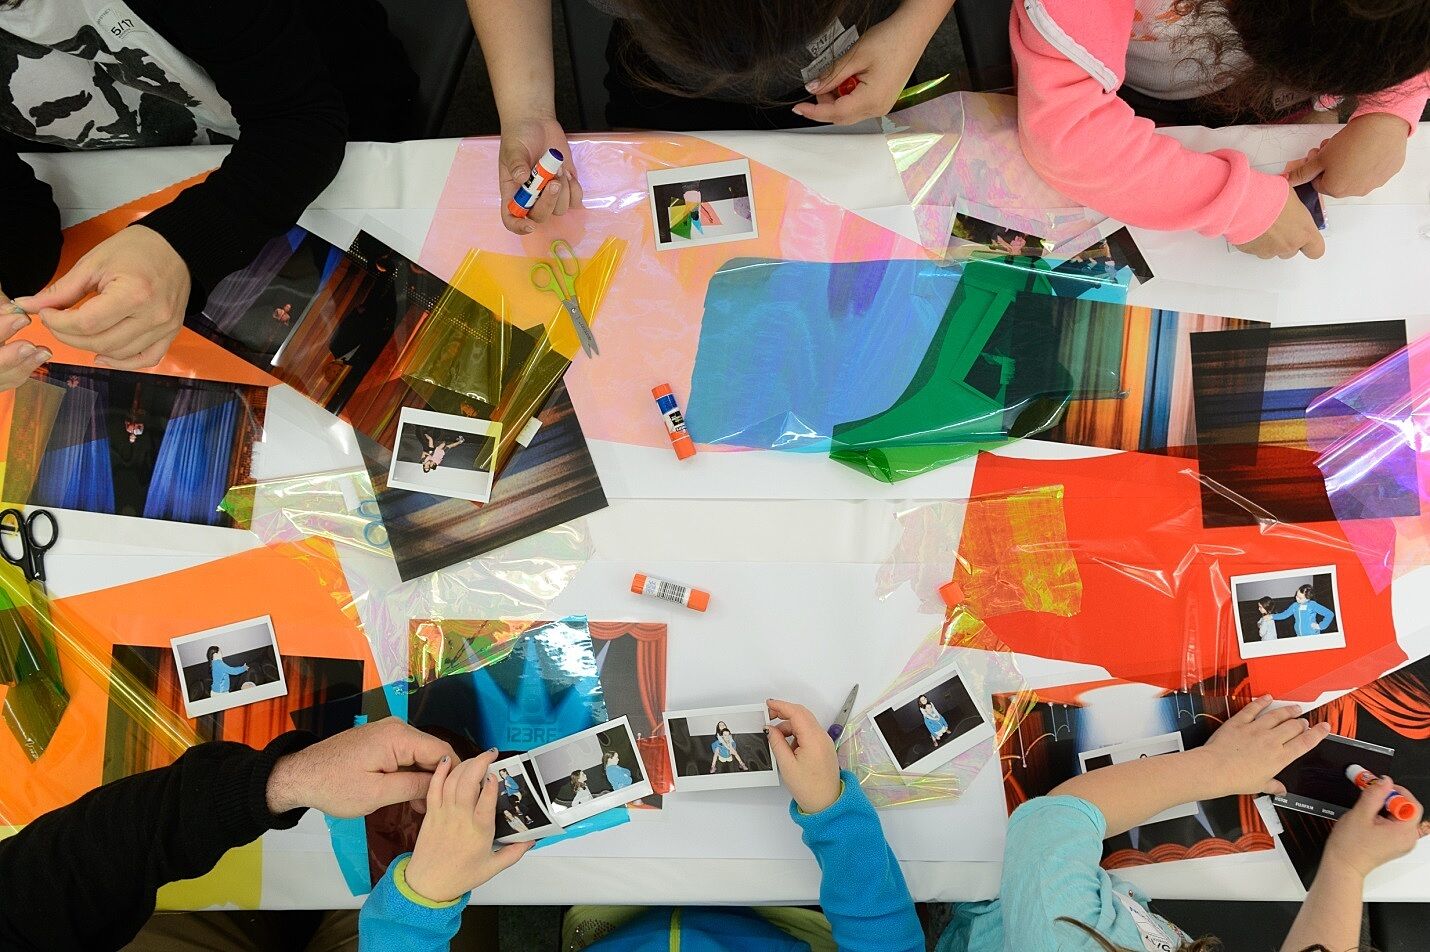 Children experiment with photographs, glue, and colored translucent paper.